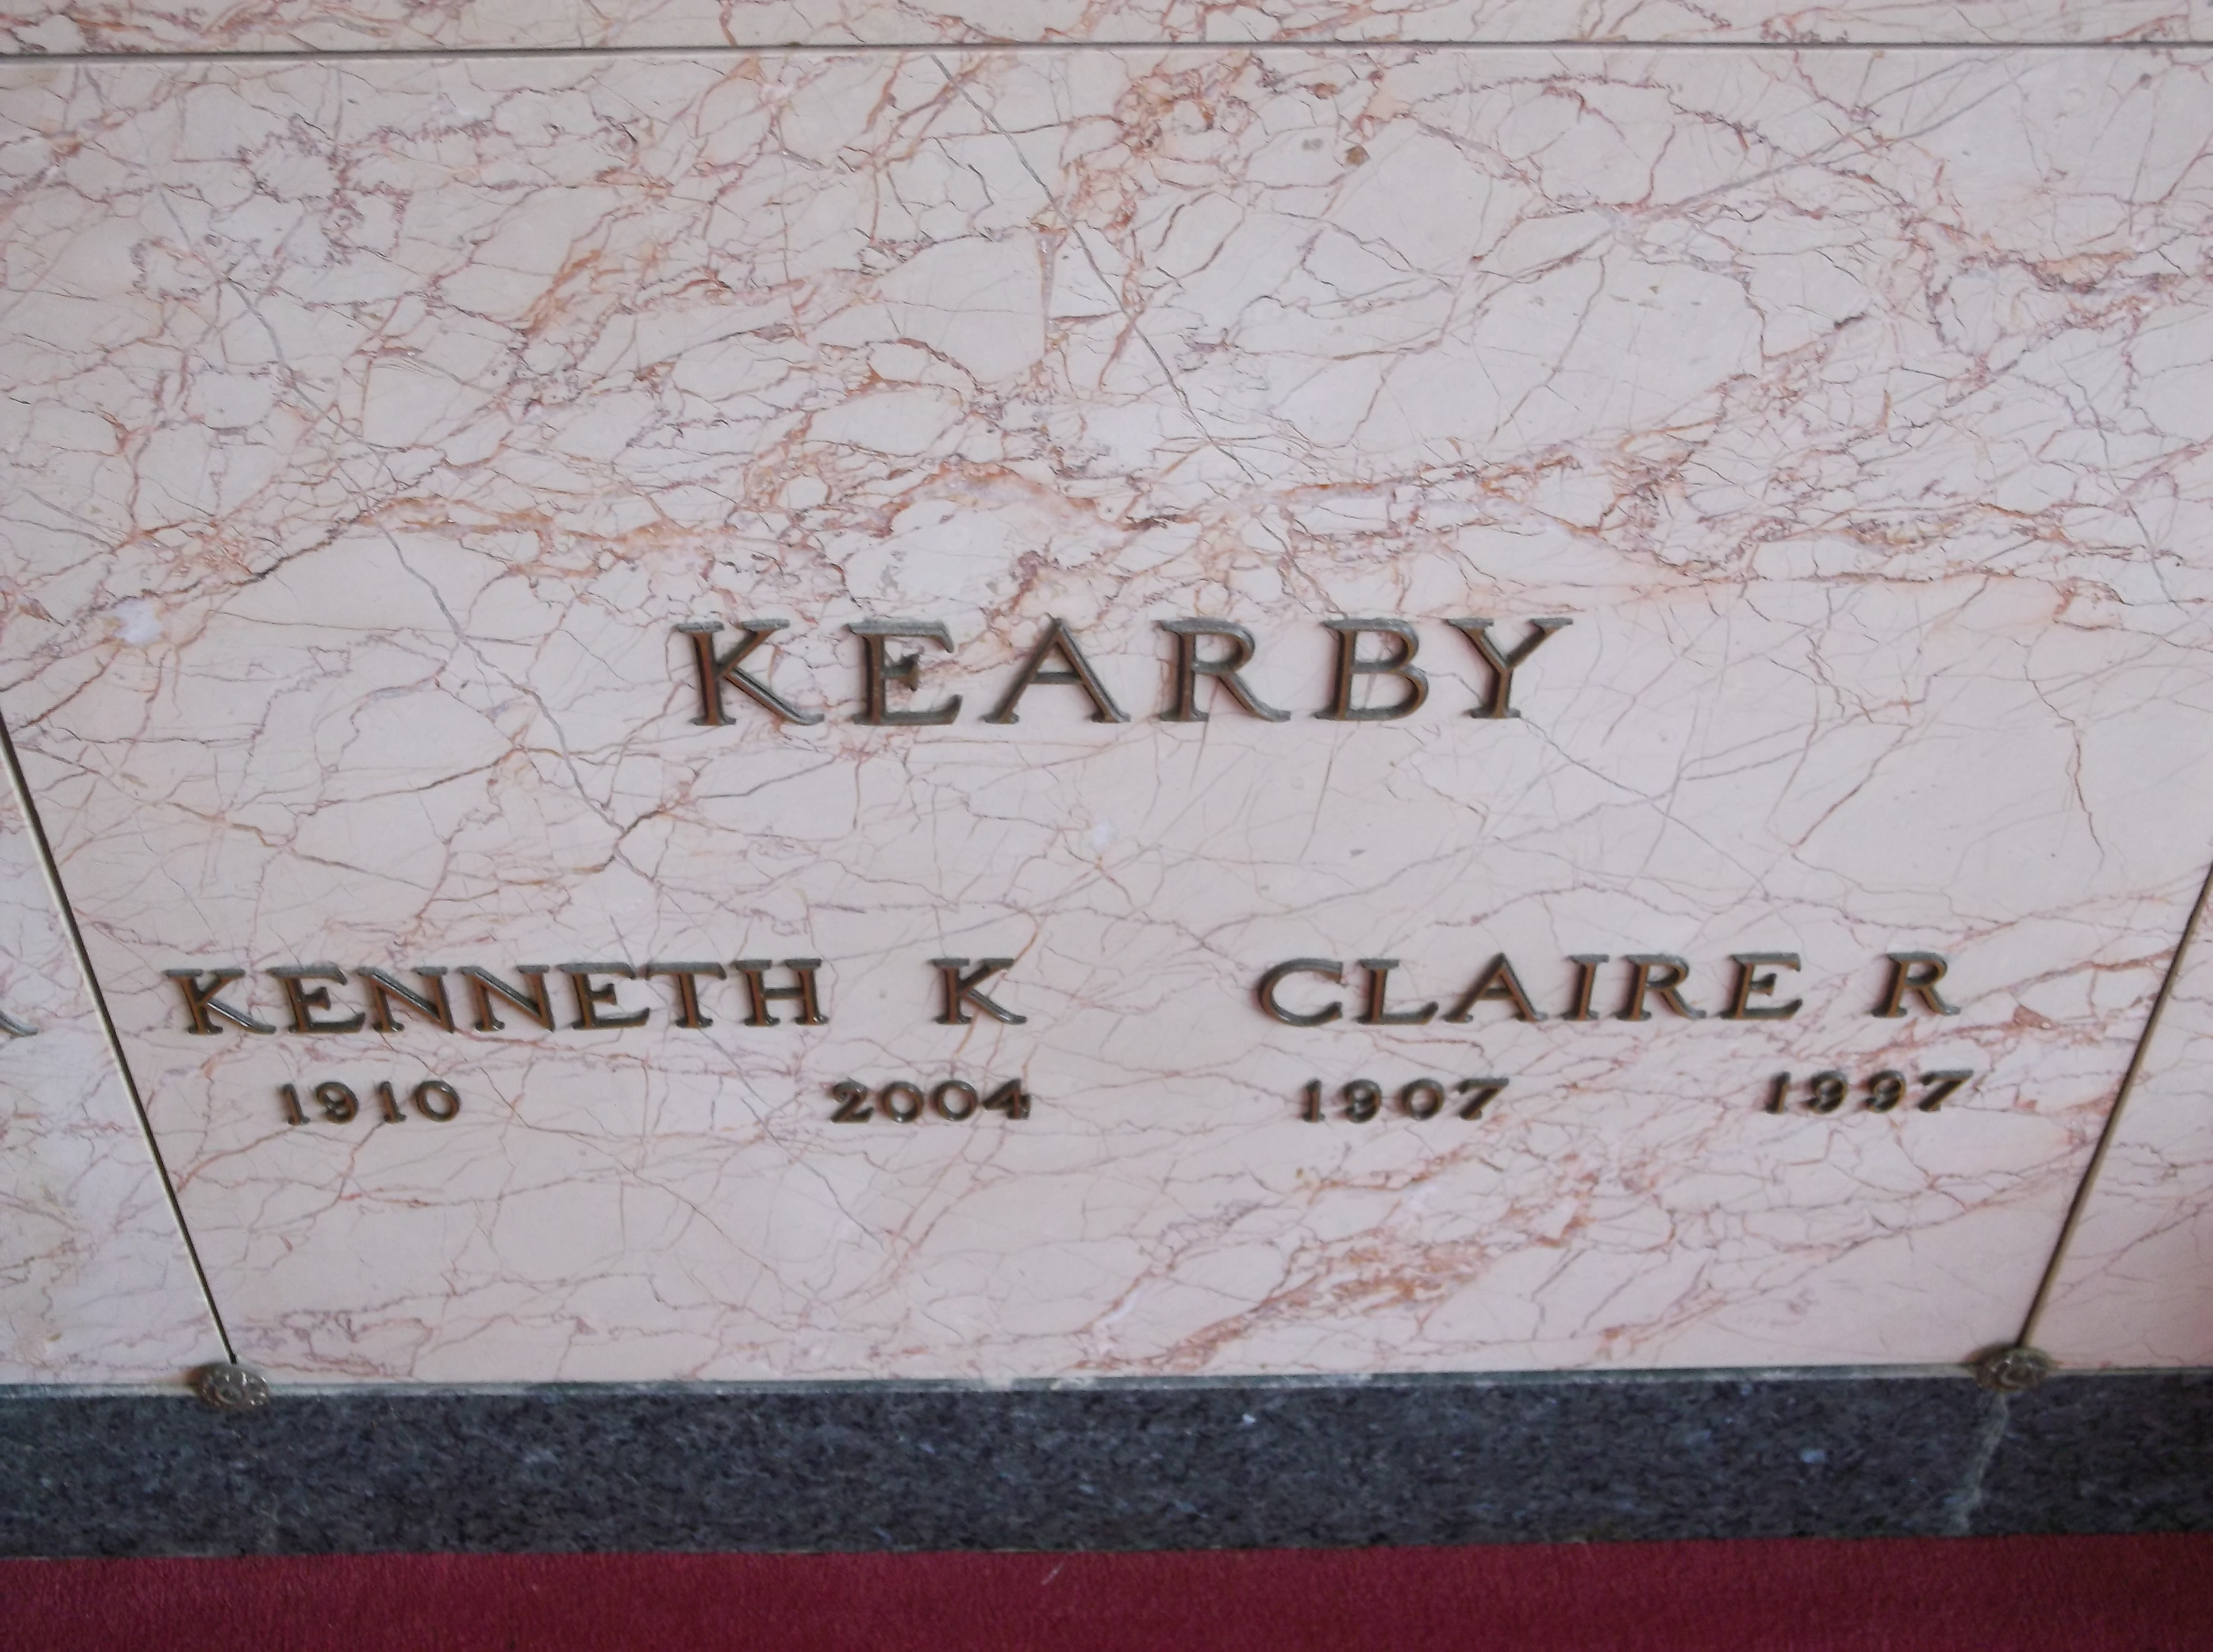 Claire R Kearby